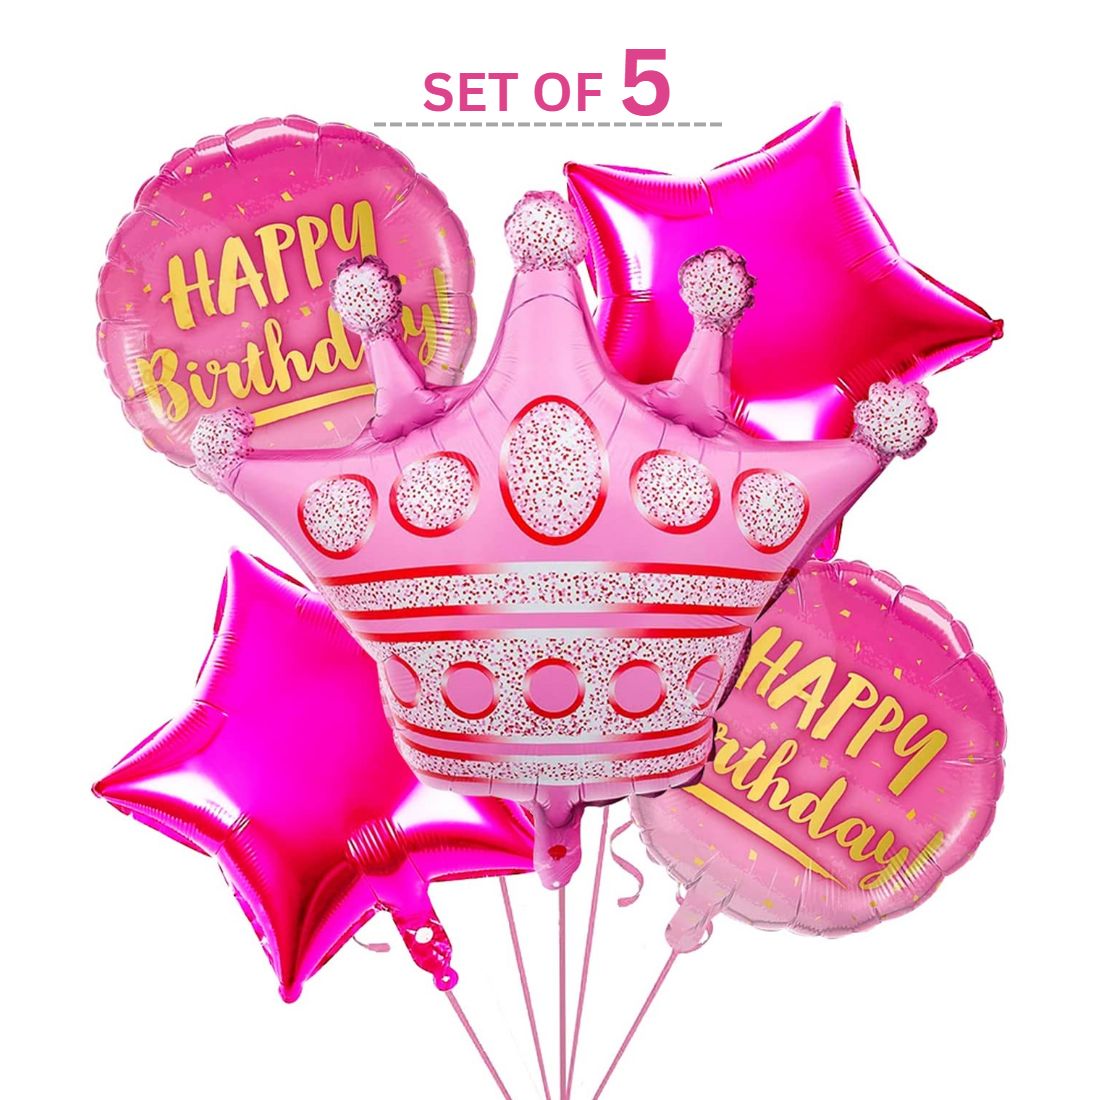 Pink Girls Princess Crown Foil Balloons Set for Girls Theme Birthday Party (set of 5)